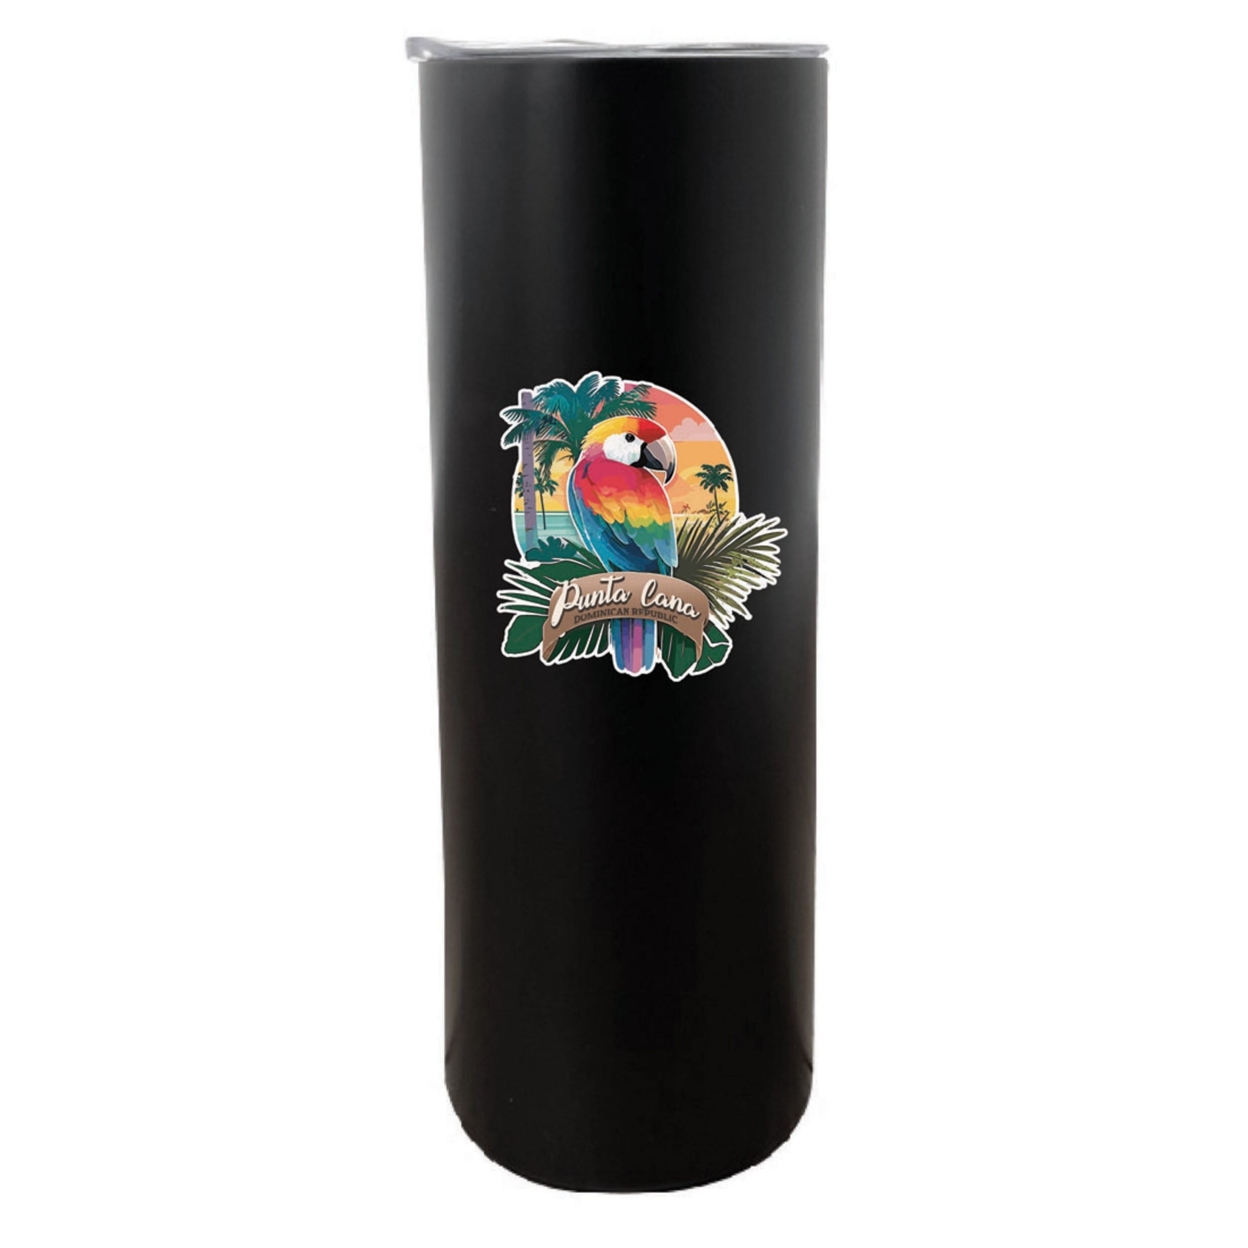 Punta Cana Dominican Republic Souvenir 20 Oz Insulated Stainless Steel Skinny Tumbler - Navy, PALM